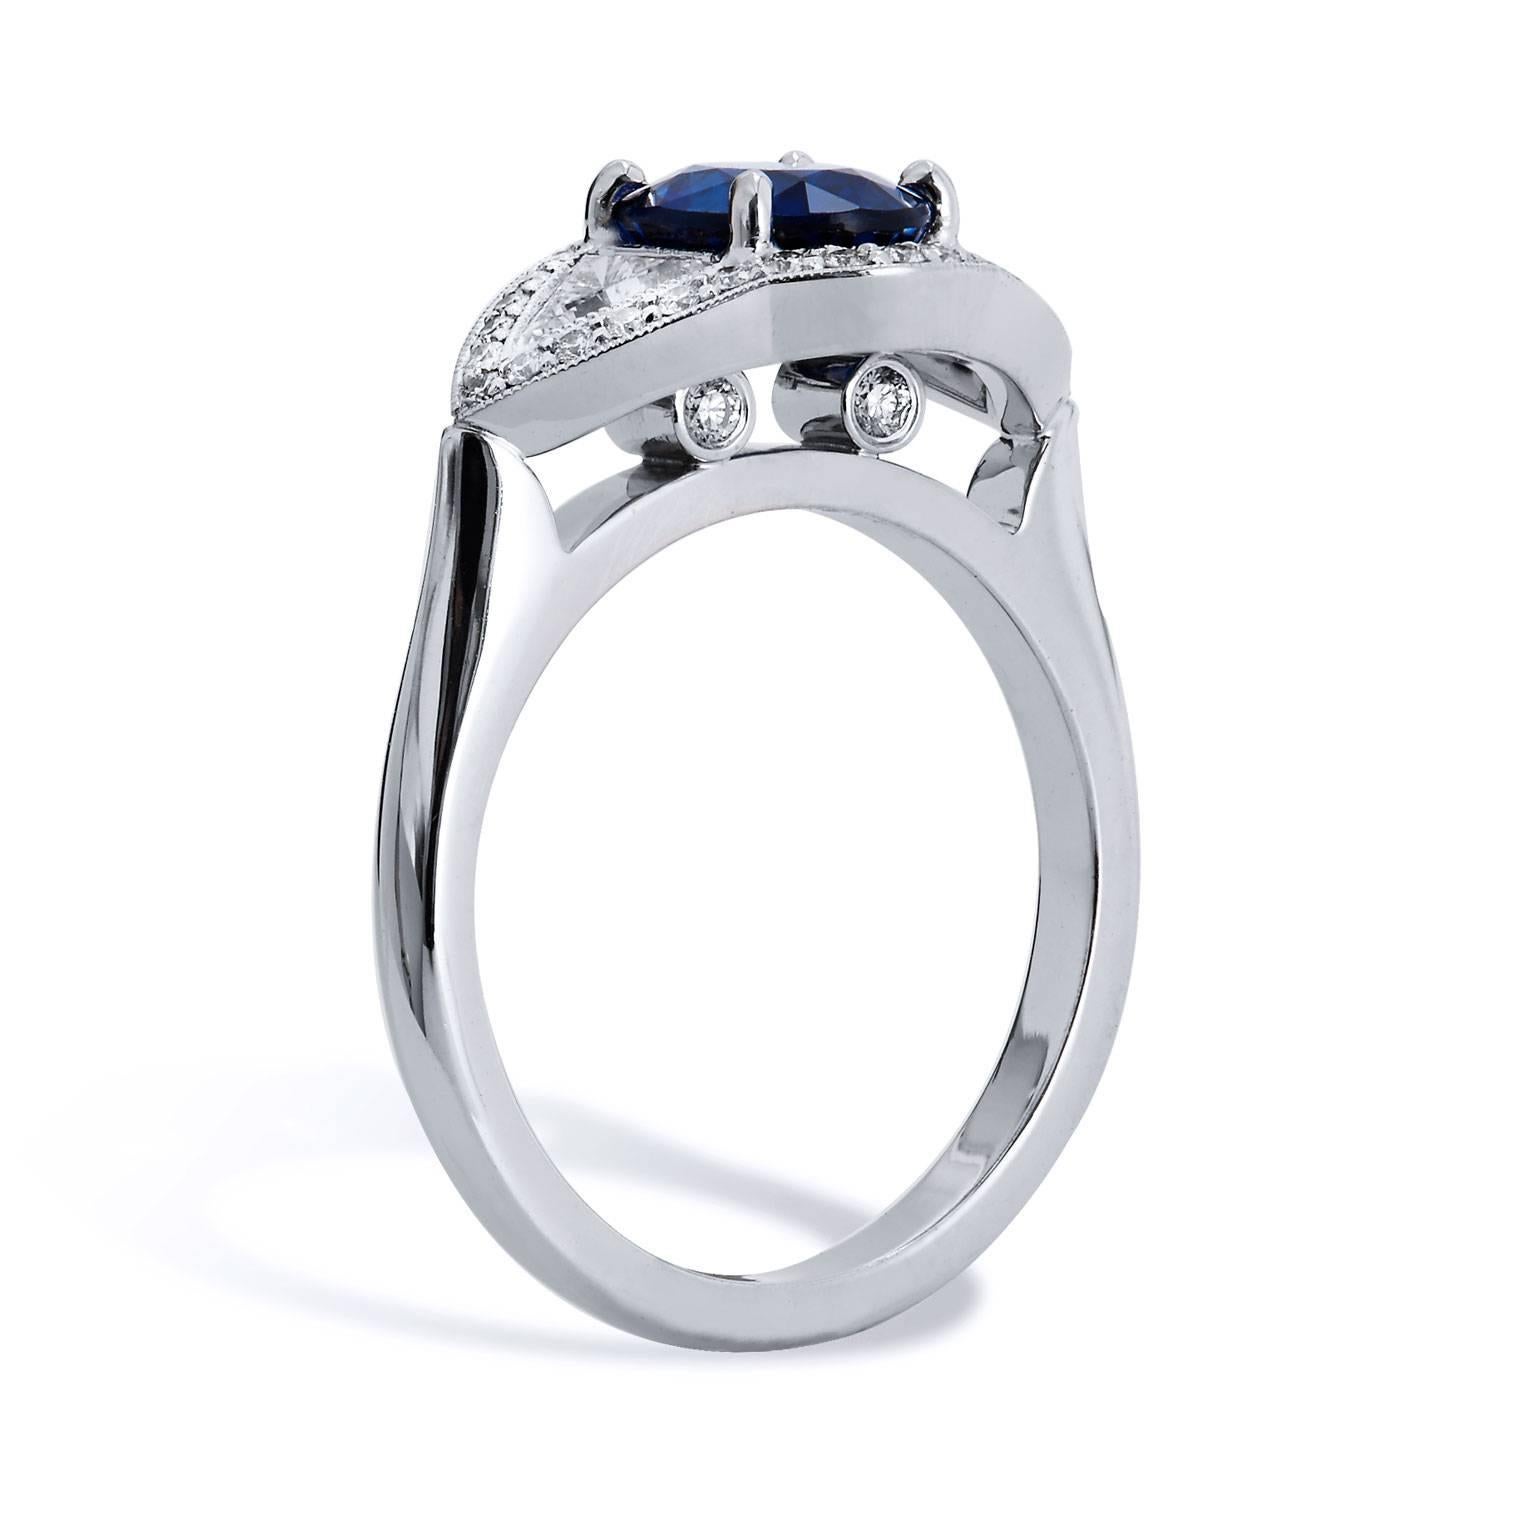 Like that of the blue evil eye of the Mediterranean, a 1.50 carat Royal Blue Sapphire is set at center in this mesmerizing handmade 18 karat white gold cocktail ring. Two bezel-set trillion cut diamonds (I/J/SI) with a total weight of 0.36 carat,